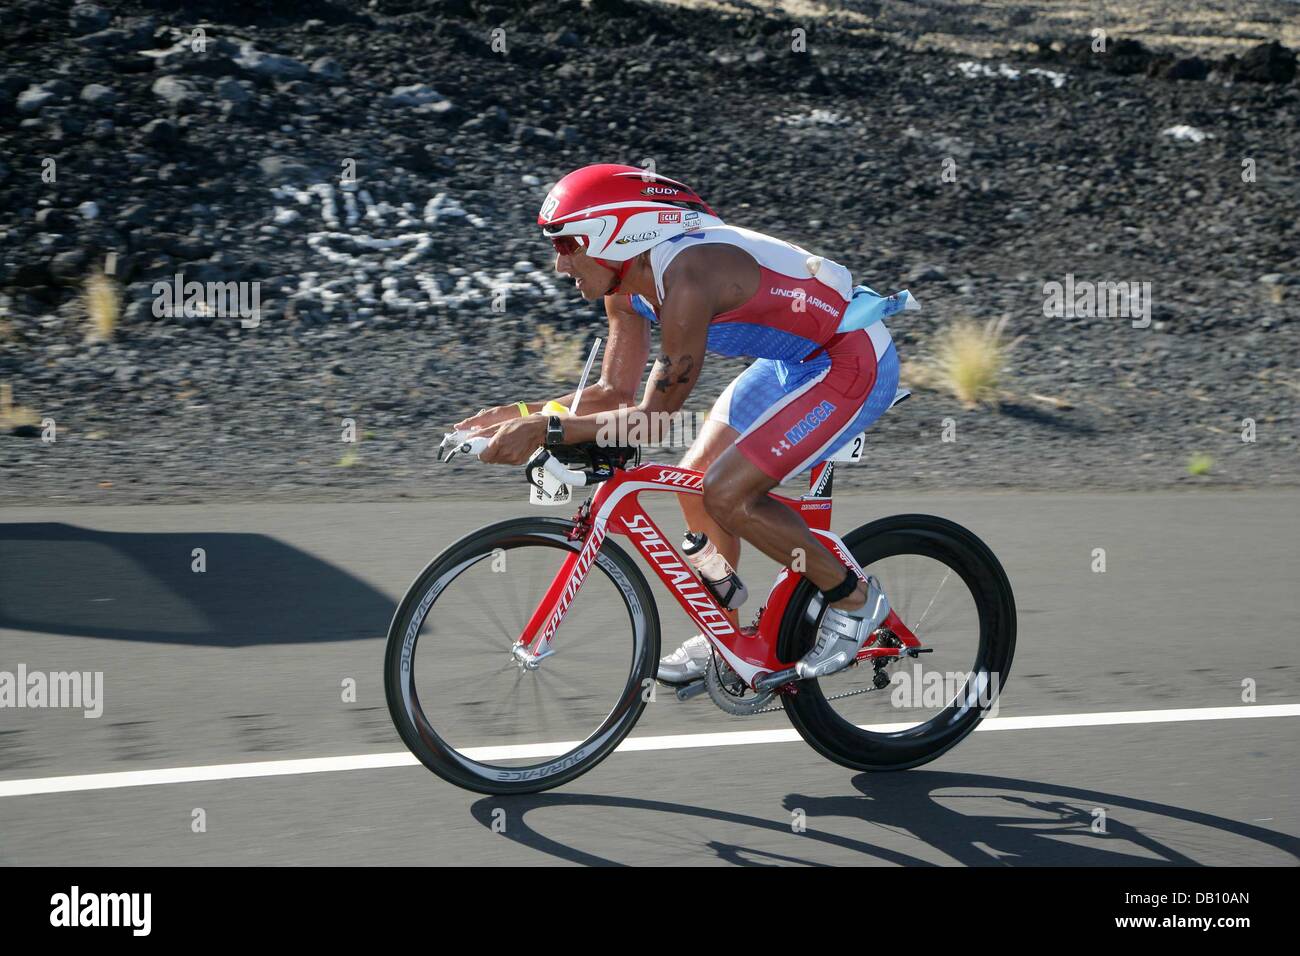 Australian triathlete Chris McCormack shown in action during the cycling  section of the Ironman-Triathlon-World